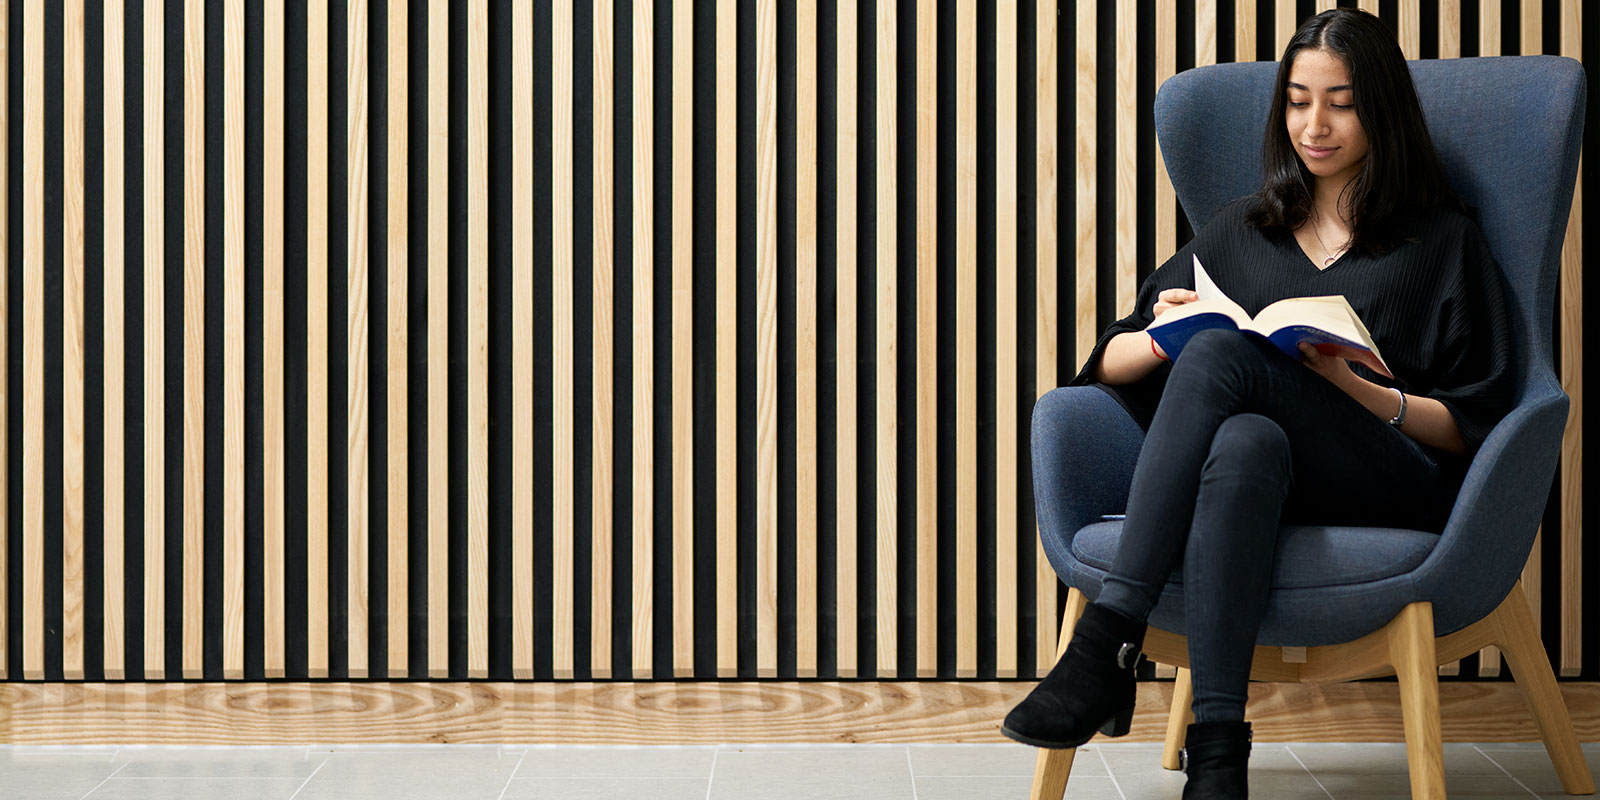 Women sitting on a chair, reading.